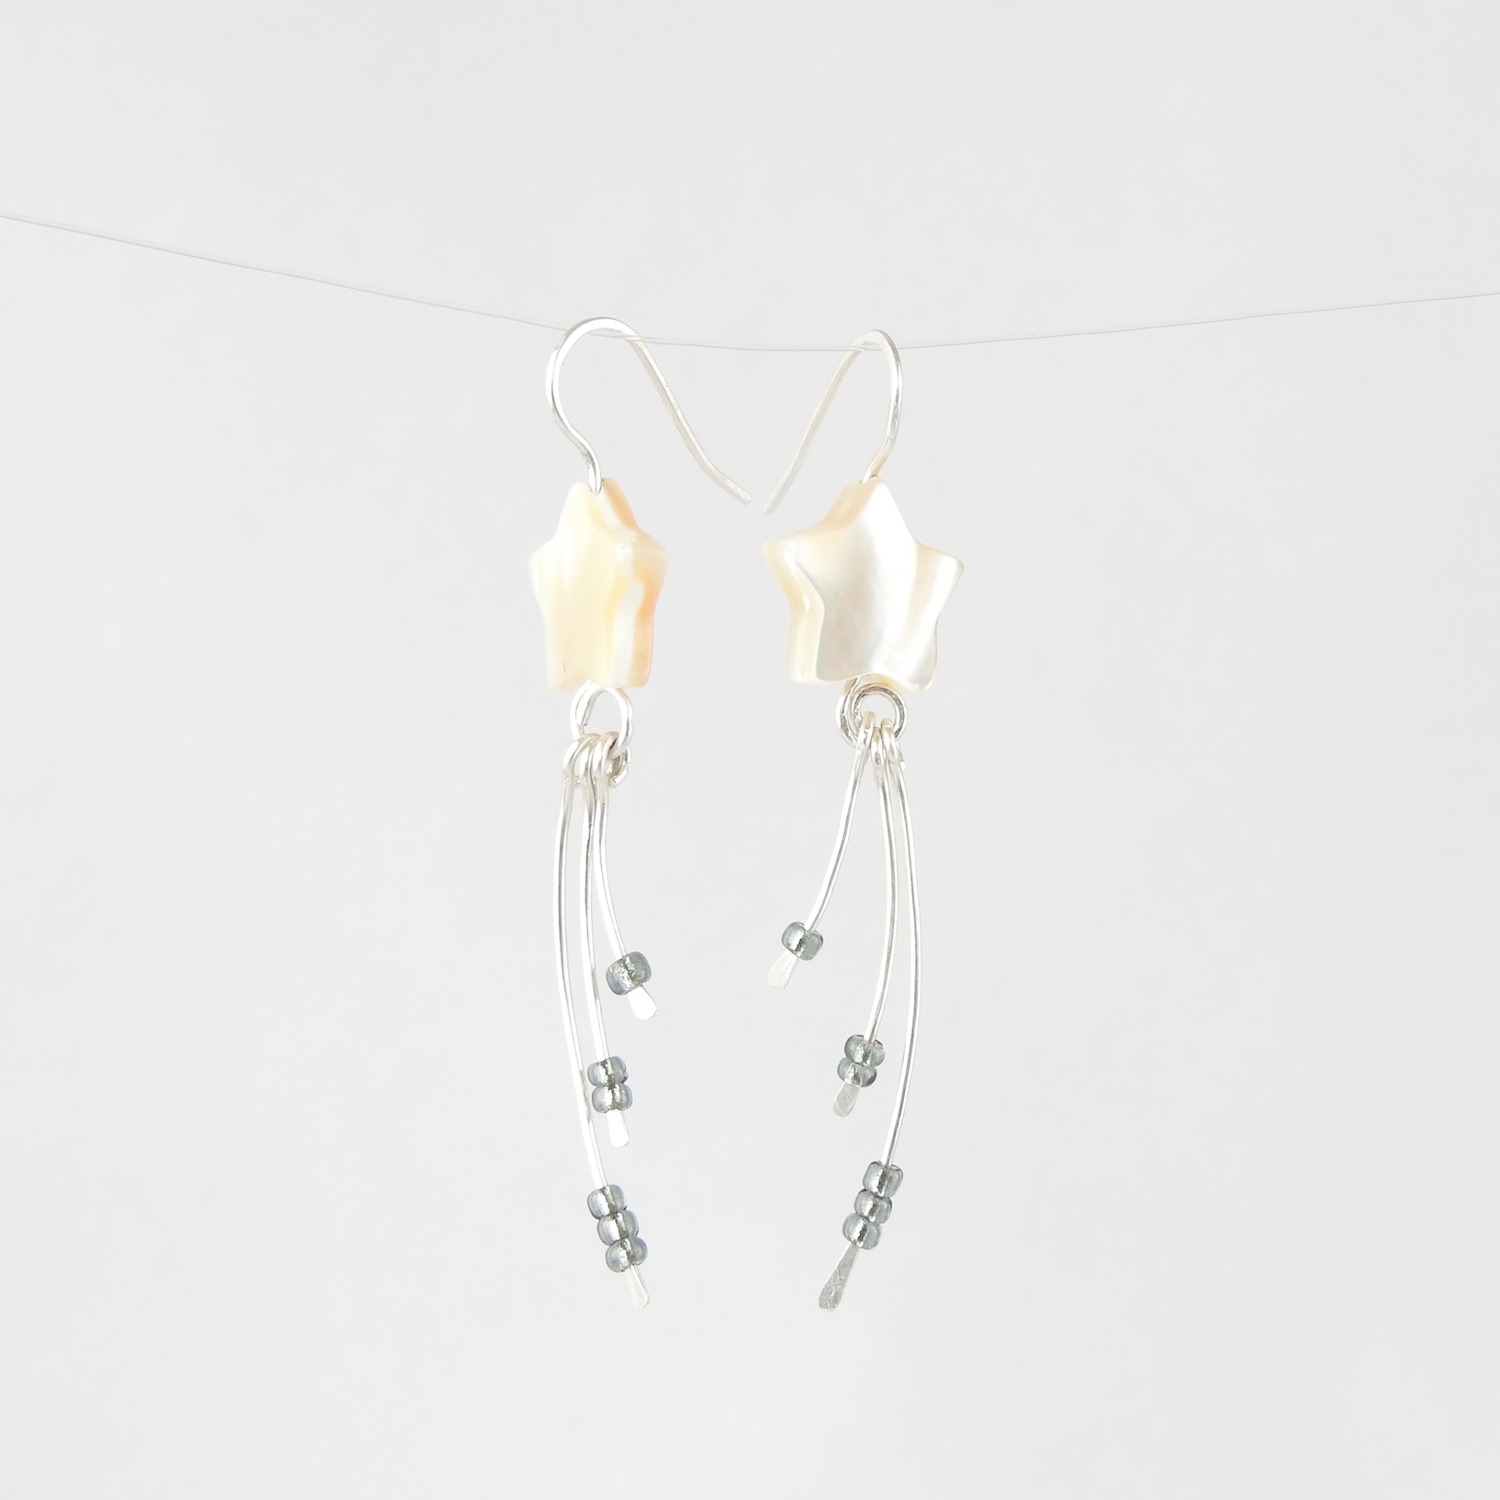 Hanging Wishing Star Earrings with Ivory Mother of Pearl star and eco silver three dangles